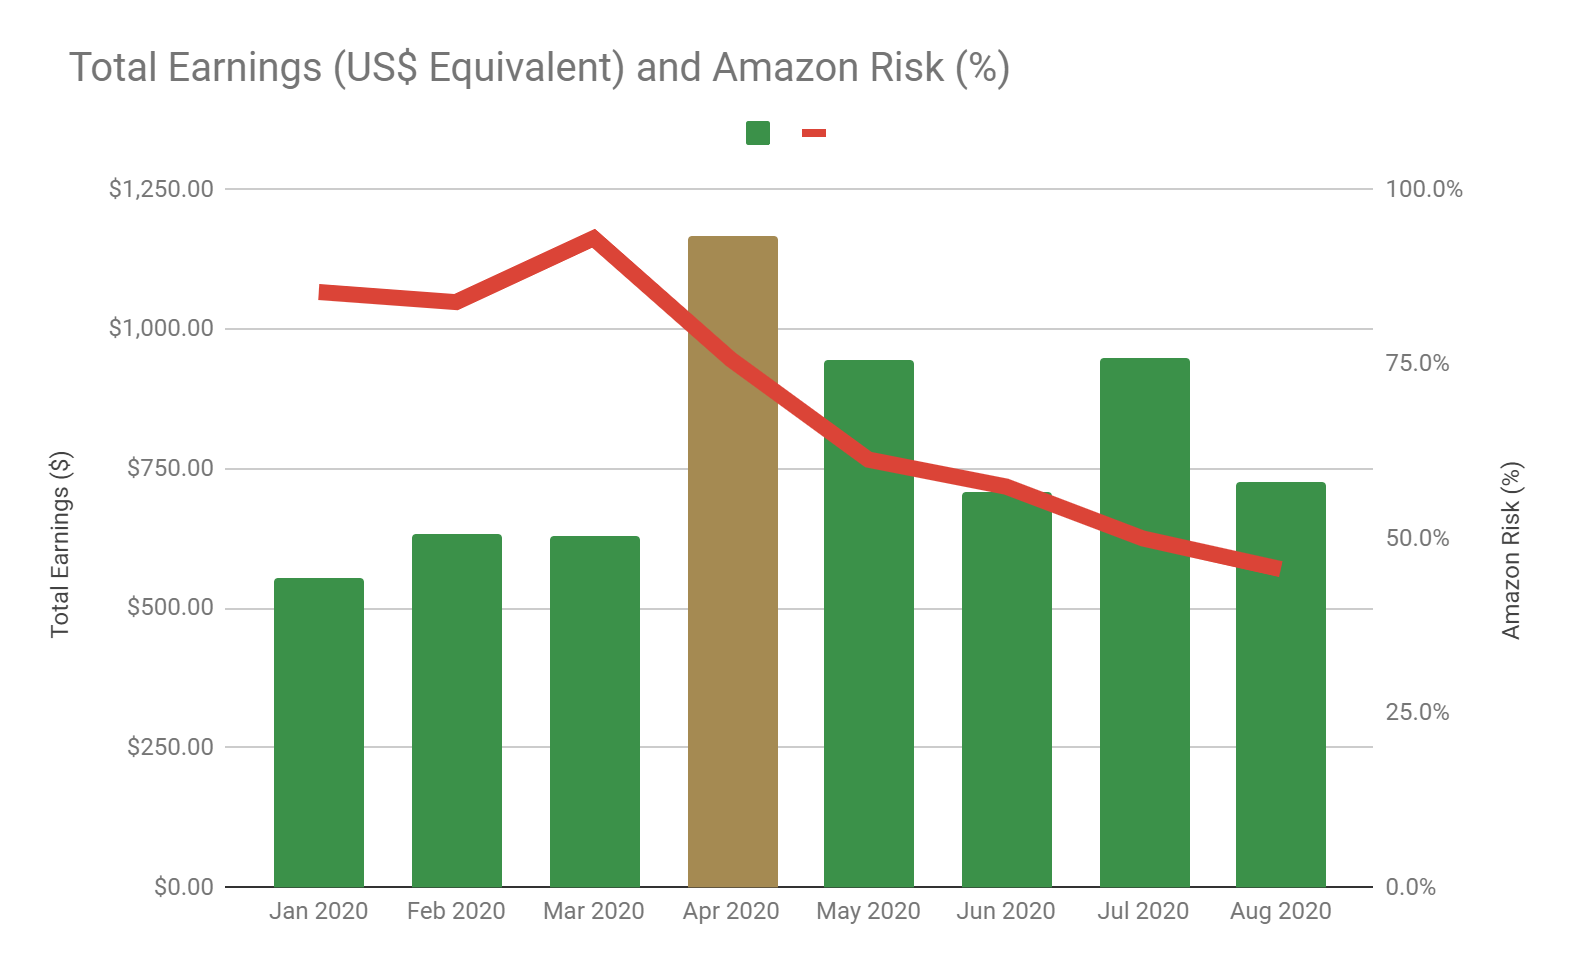 Total Earnings and Amazon Risk - Jan 2020 to Aug 2020